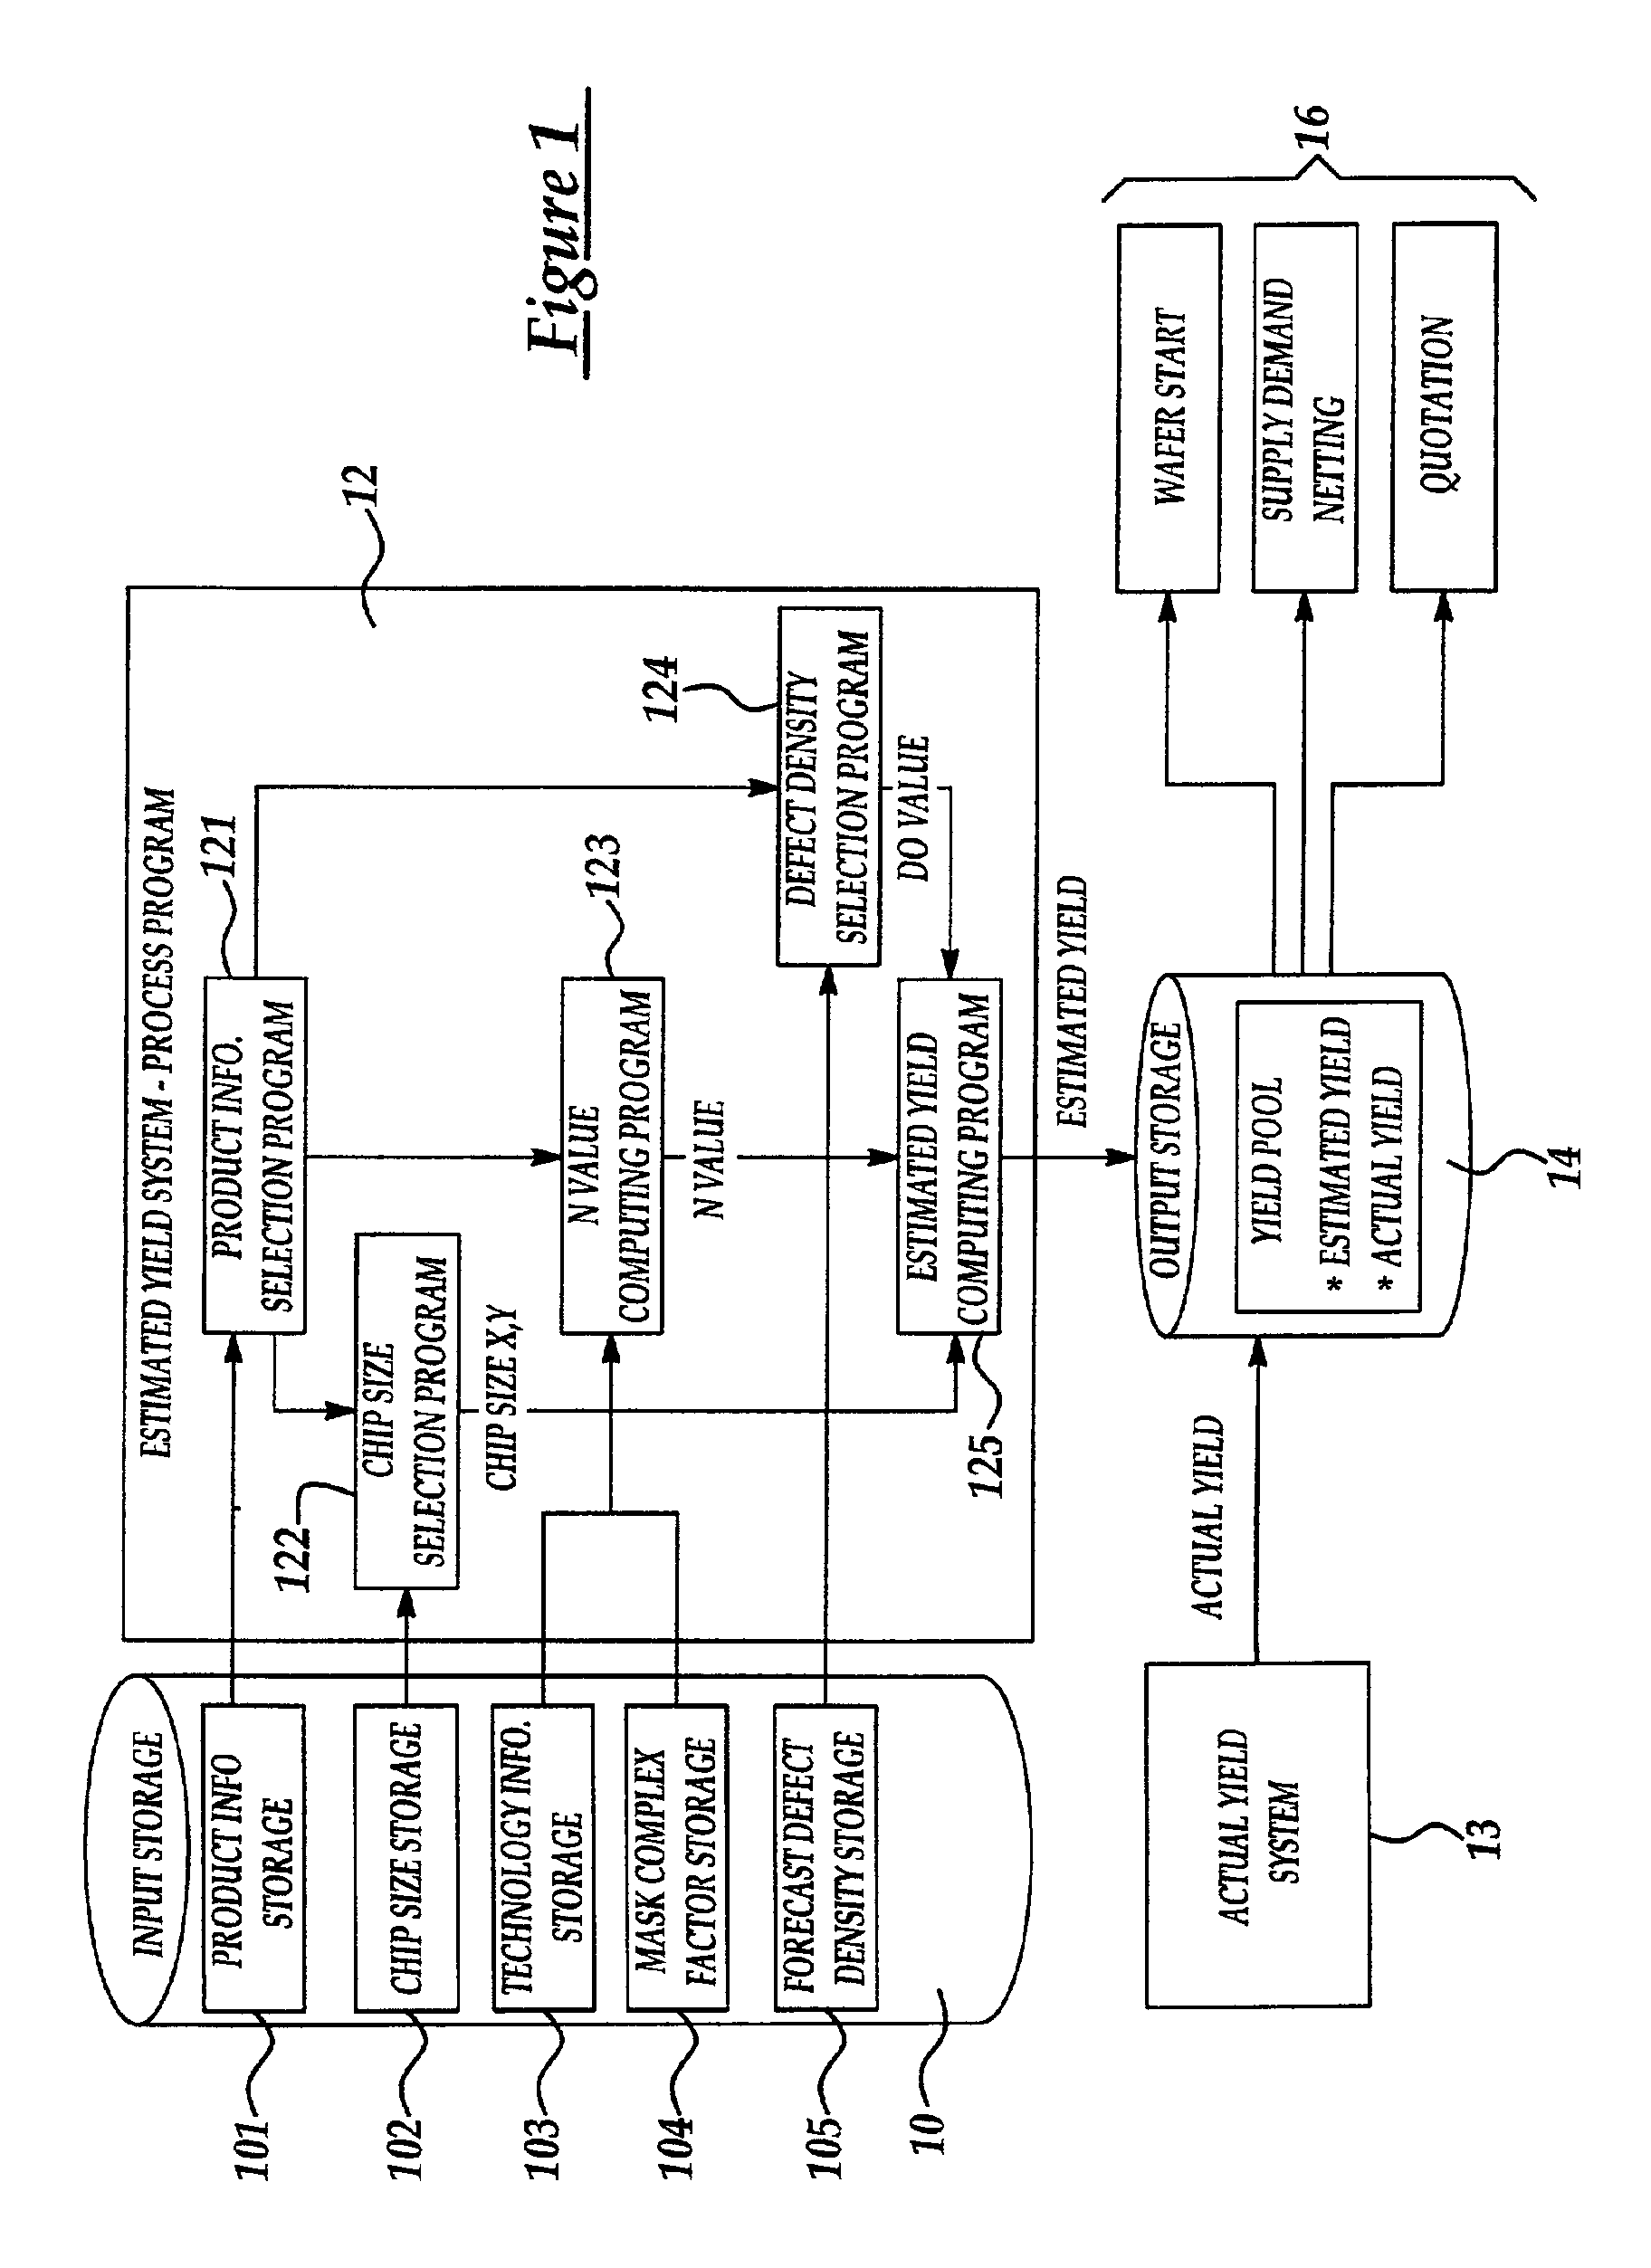 Method and system for estimating microelectronic fabrication product yield